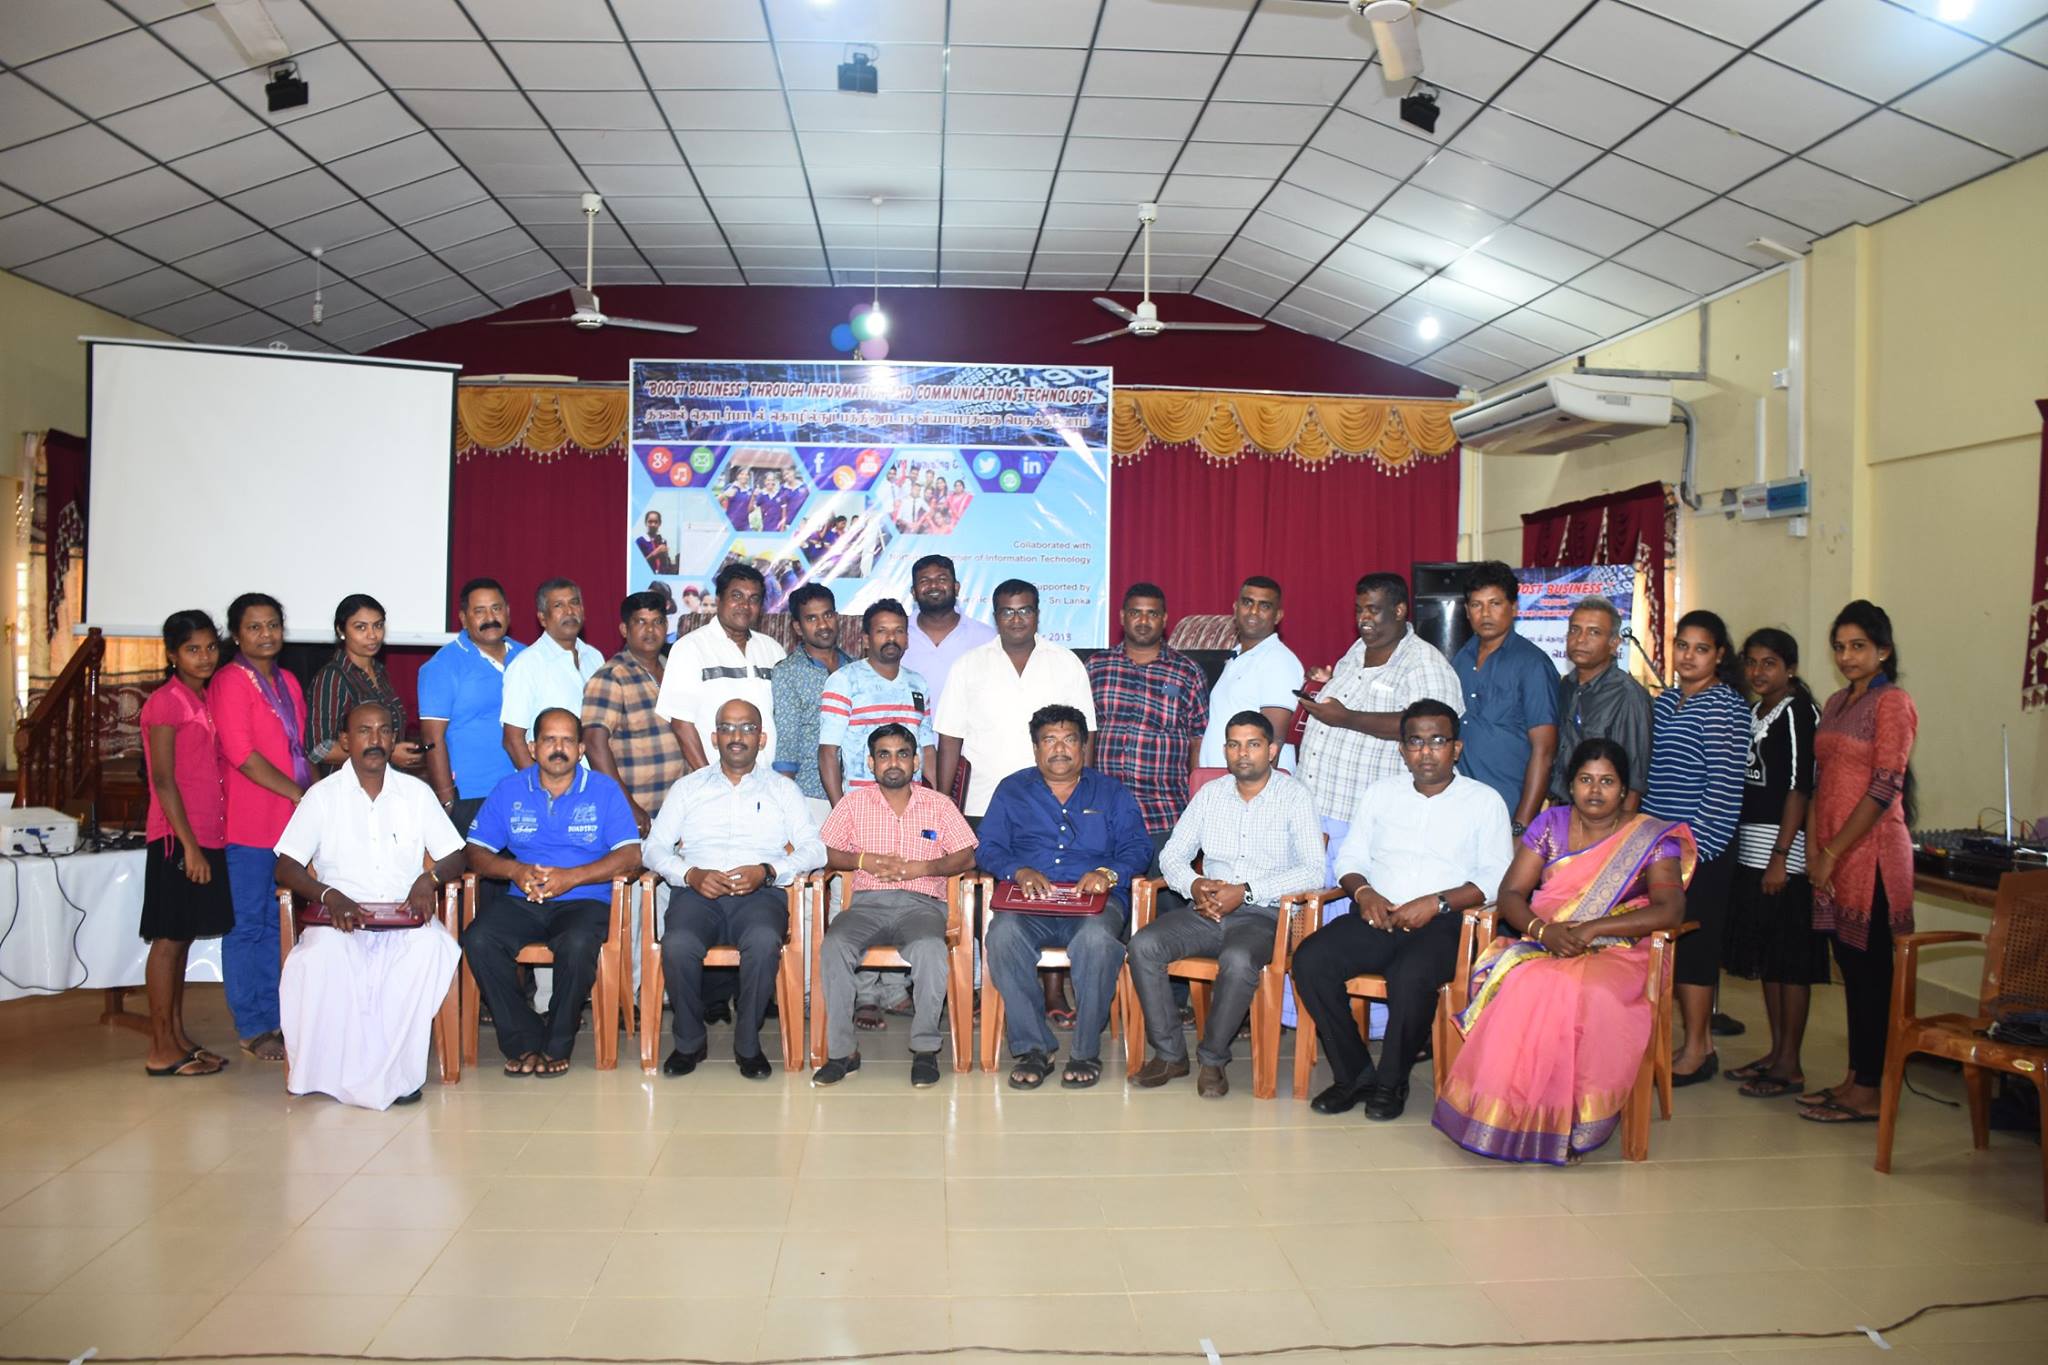 Boost Your Business through ICT Event in Kilinochchi and Mullaitivu